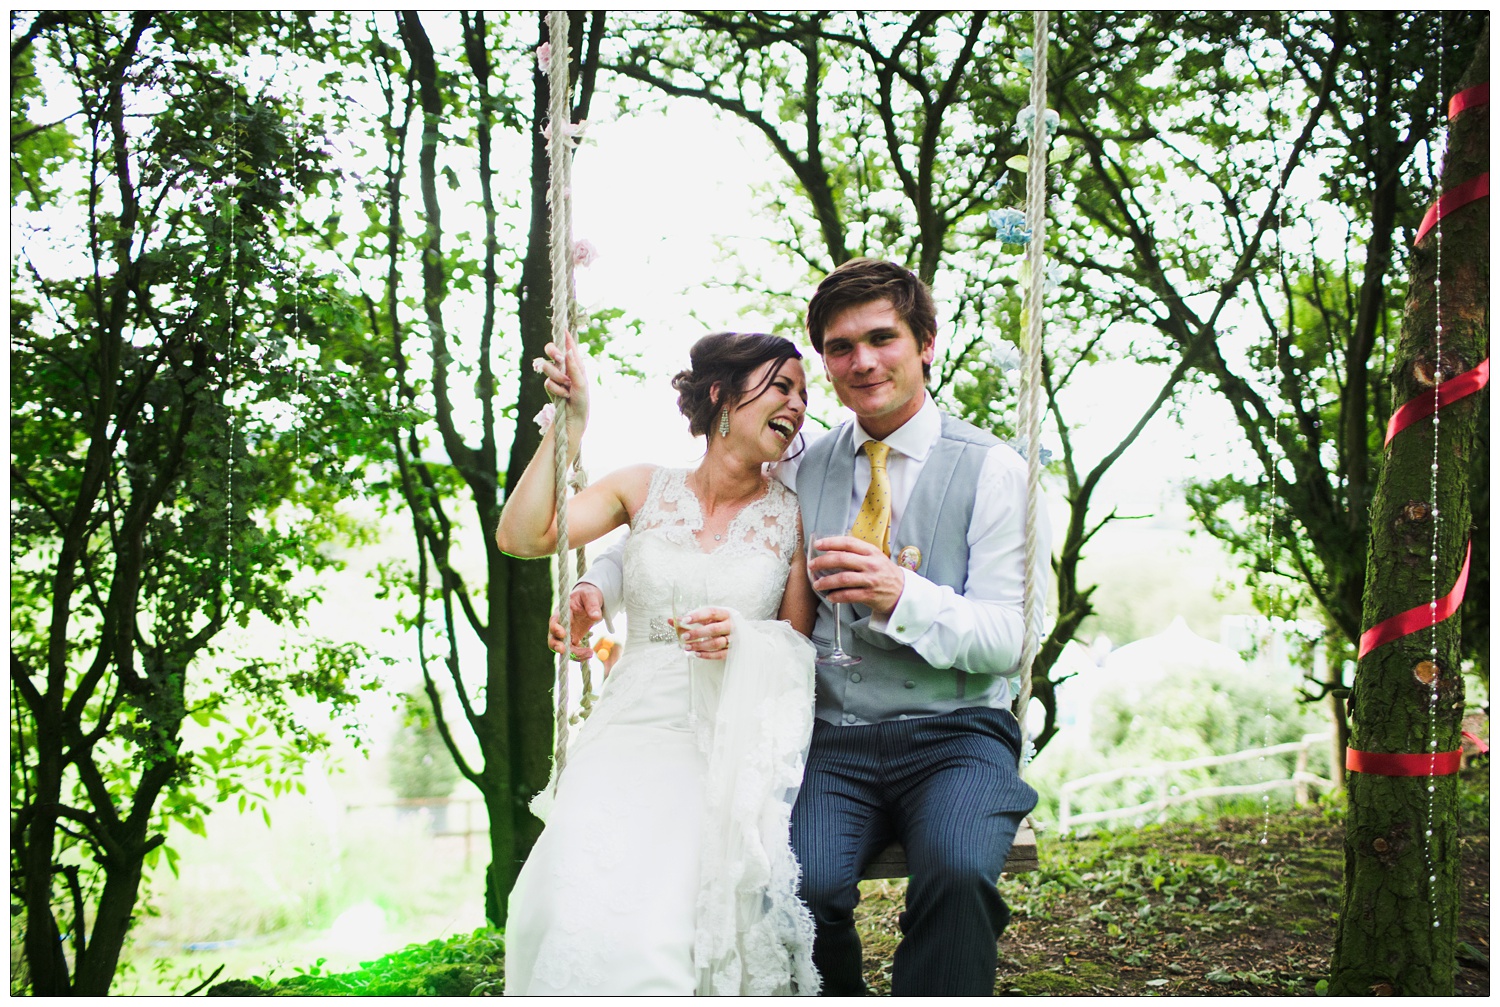 Bride is laughing and looking at the groom. They are sat on a swing in the trees holding wine glasses..